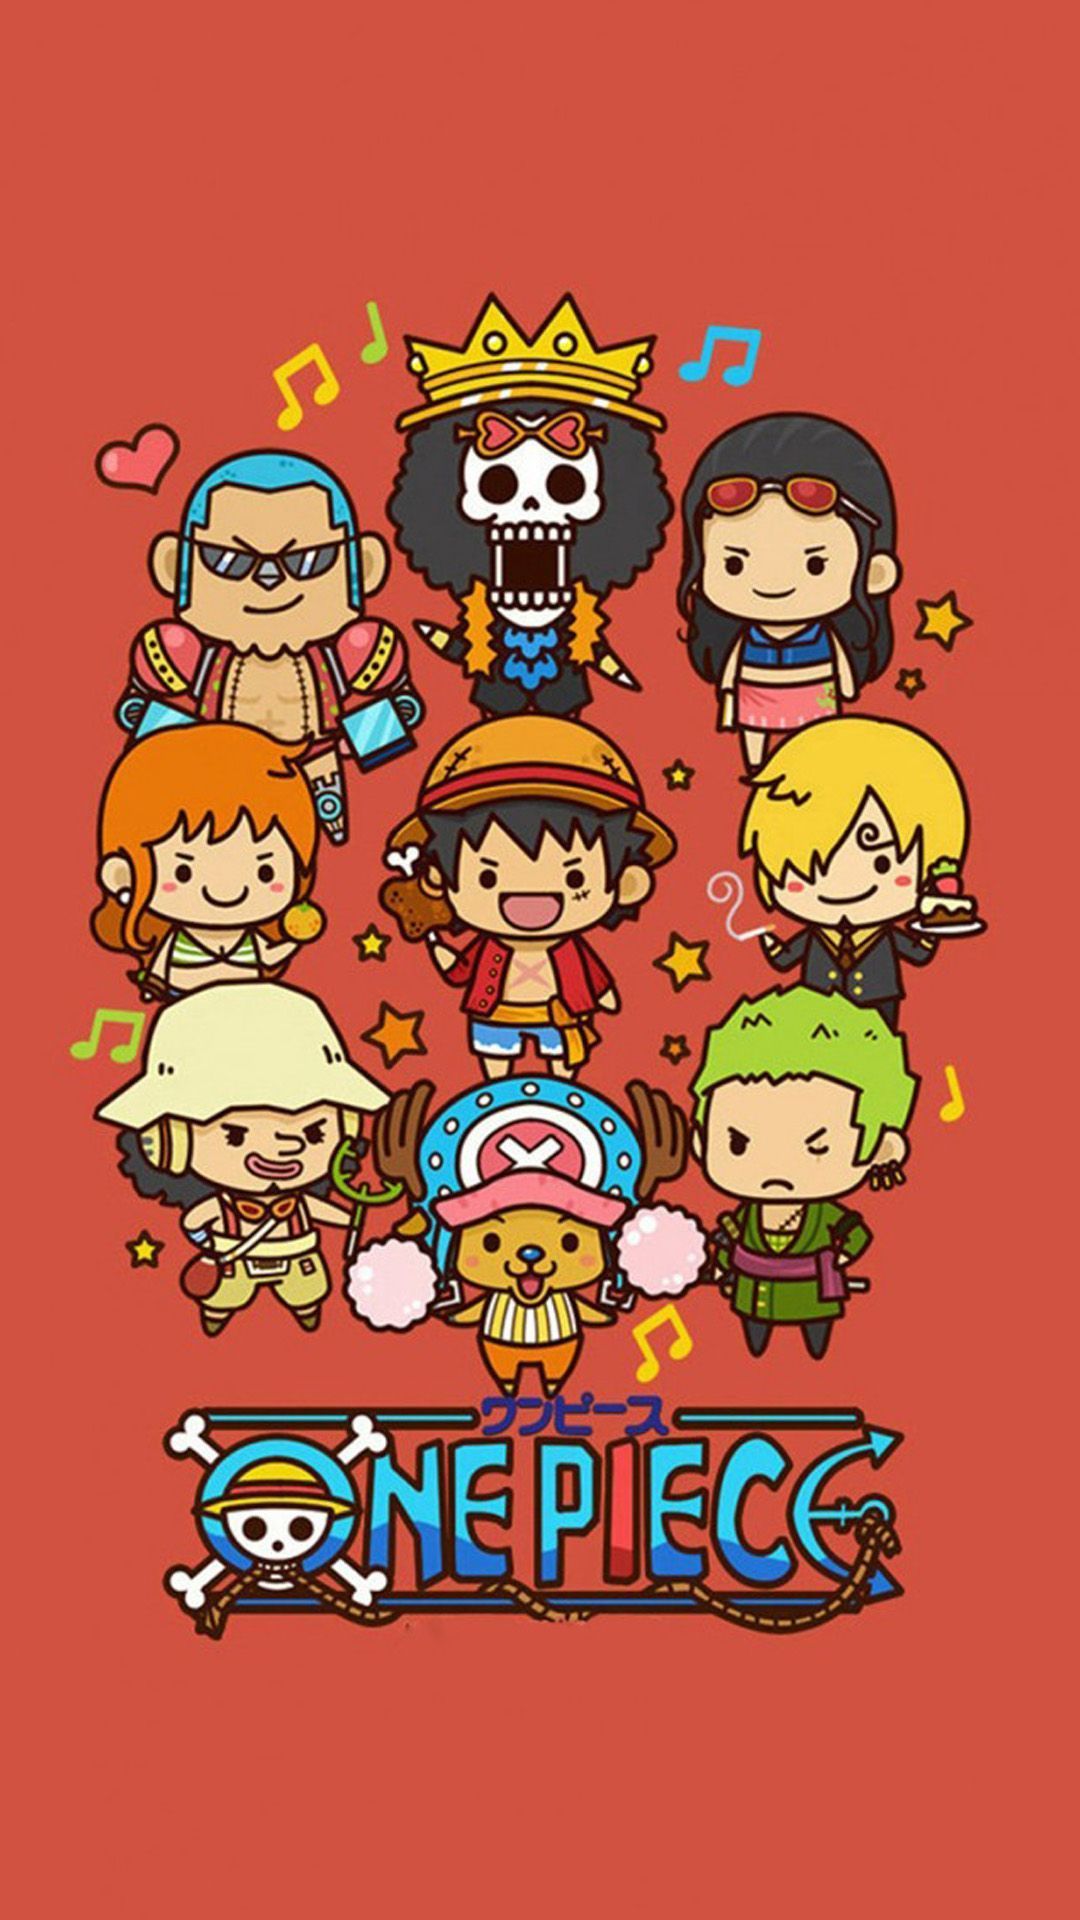 One Piece Gold D Roger Anime One Piece Id 720150 M iPhone one piece  movie HD phone wallpaper  Pxfuel